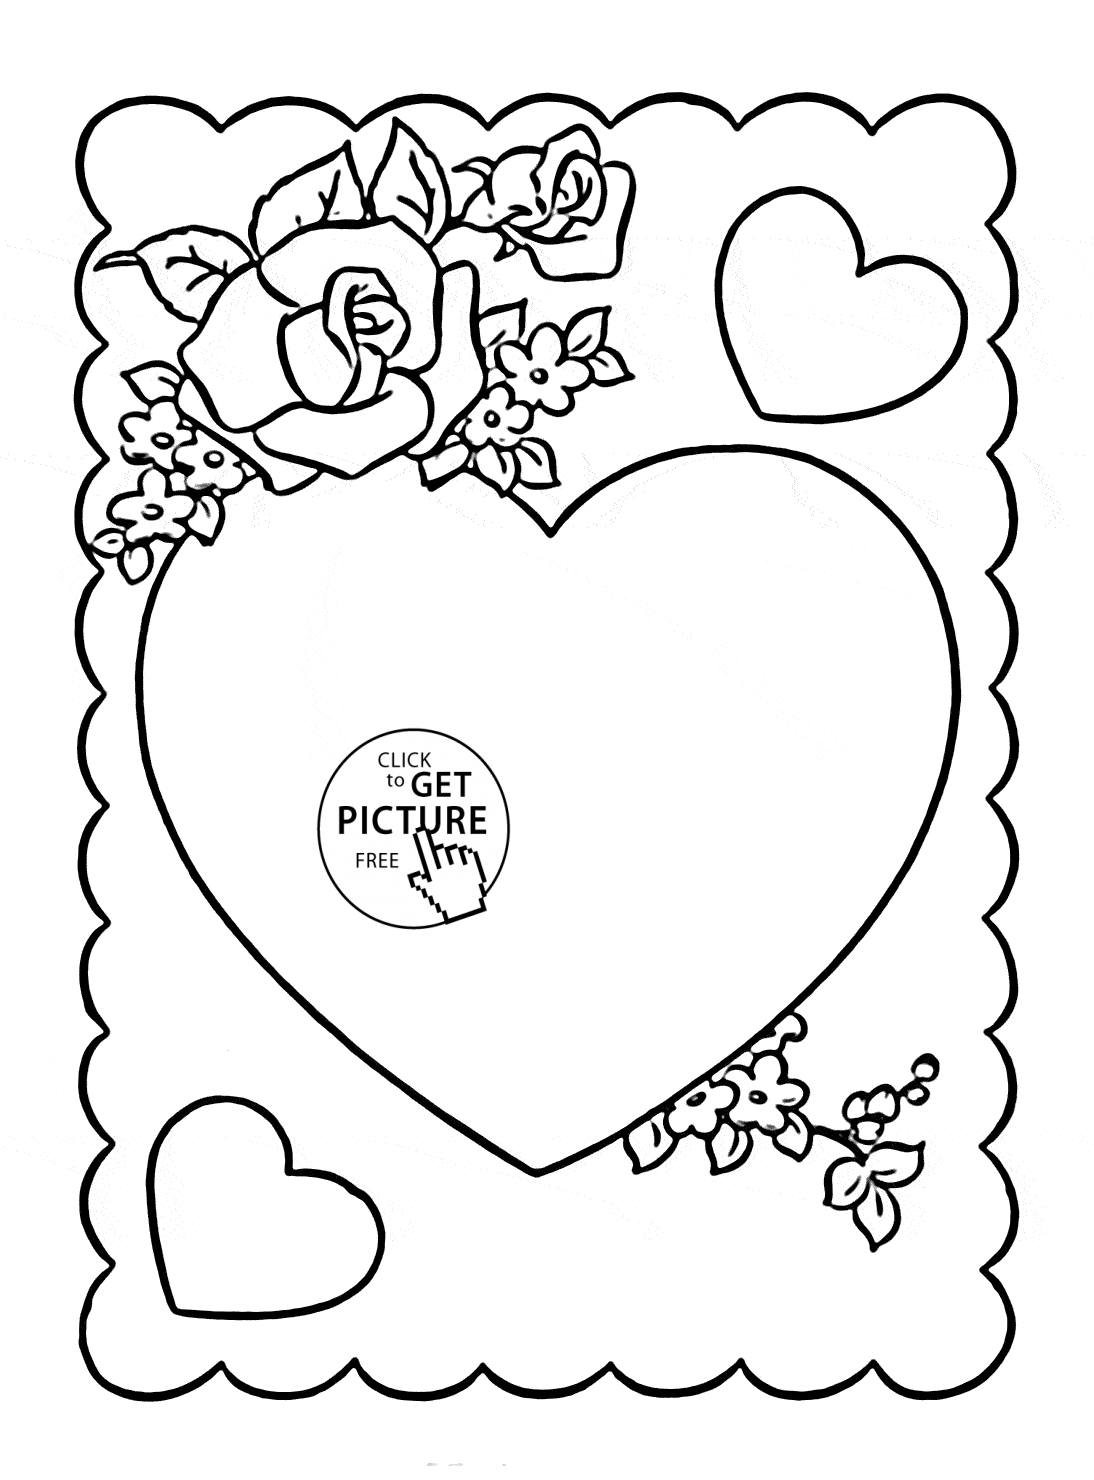 Flowers Coloring Pages Free Printable Hearts Valentine With Flowers Coloring Page For Kids For Girls